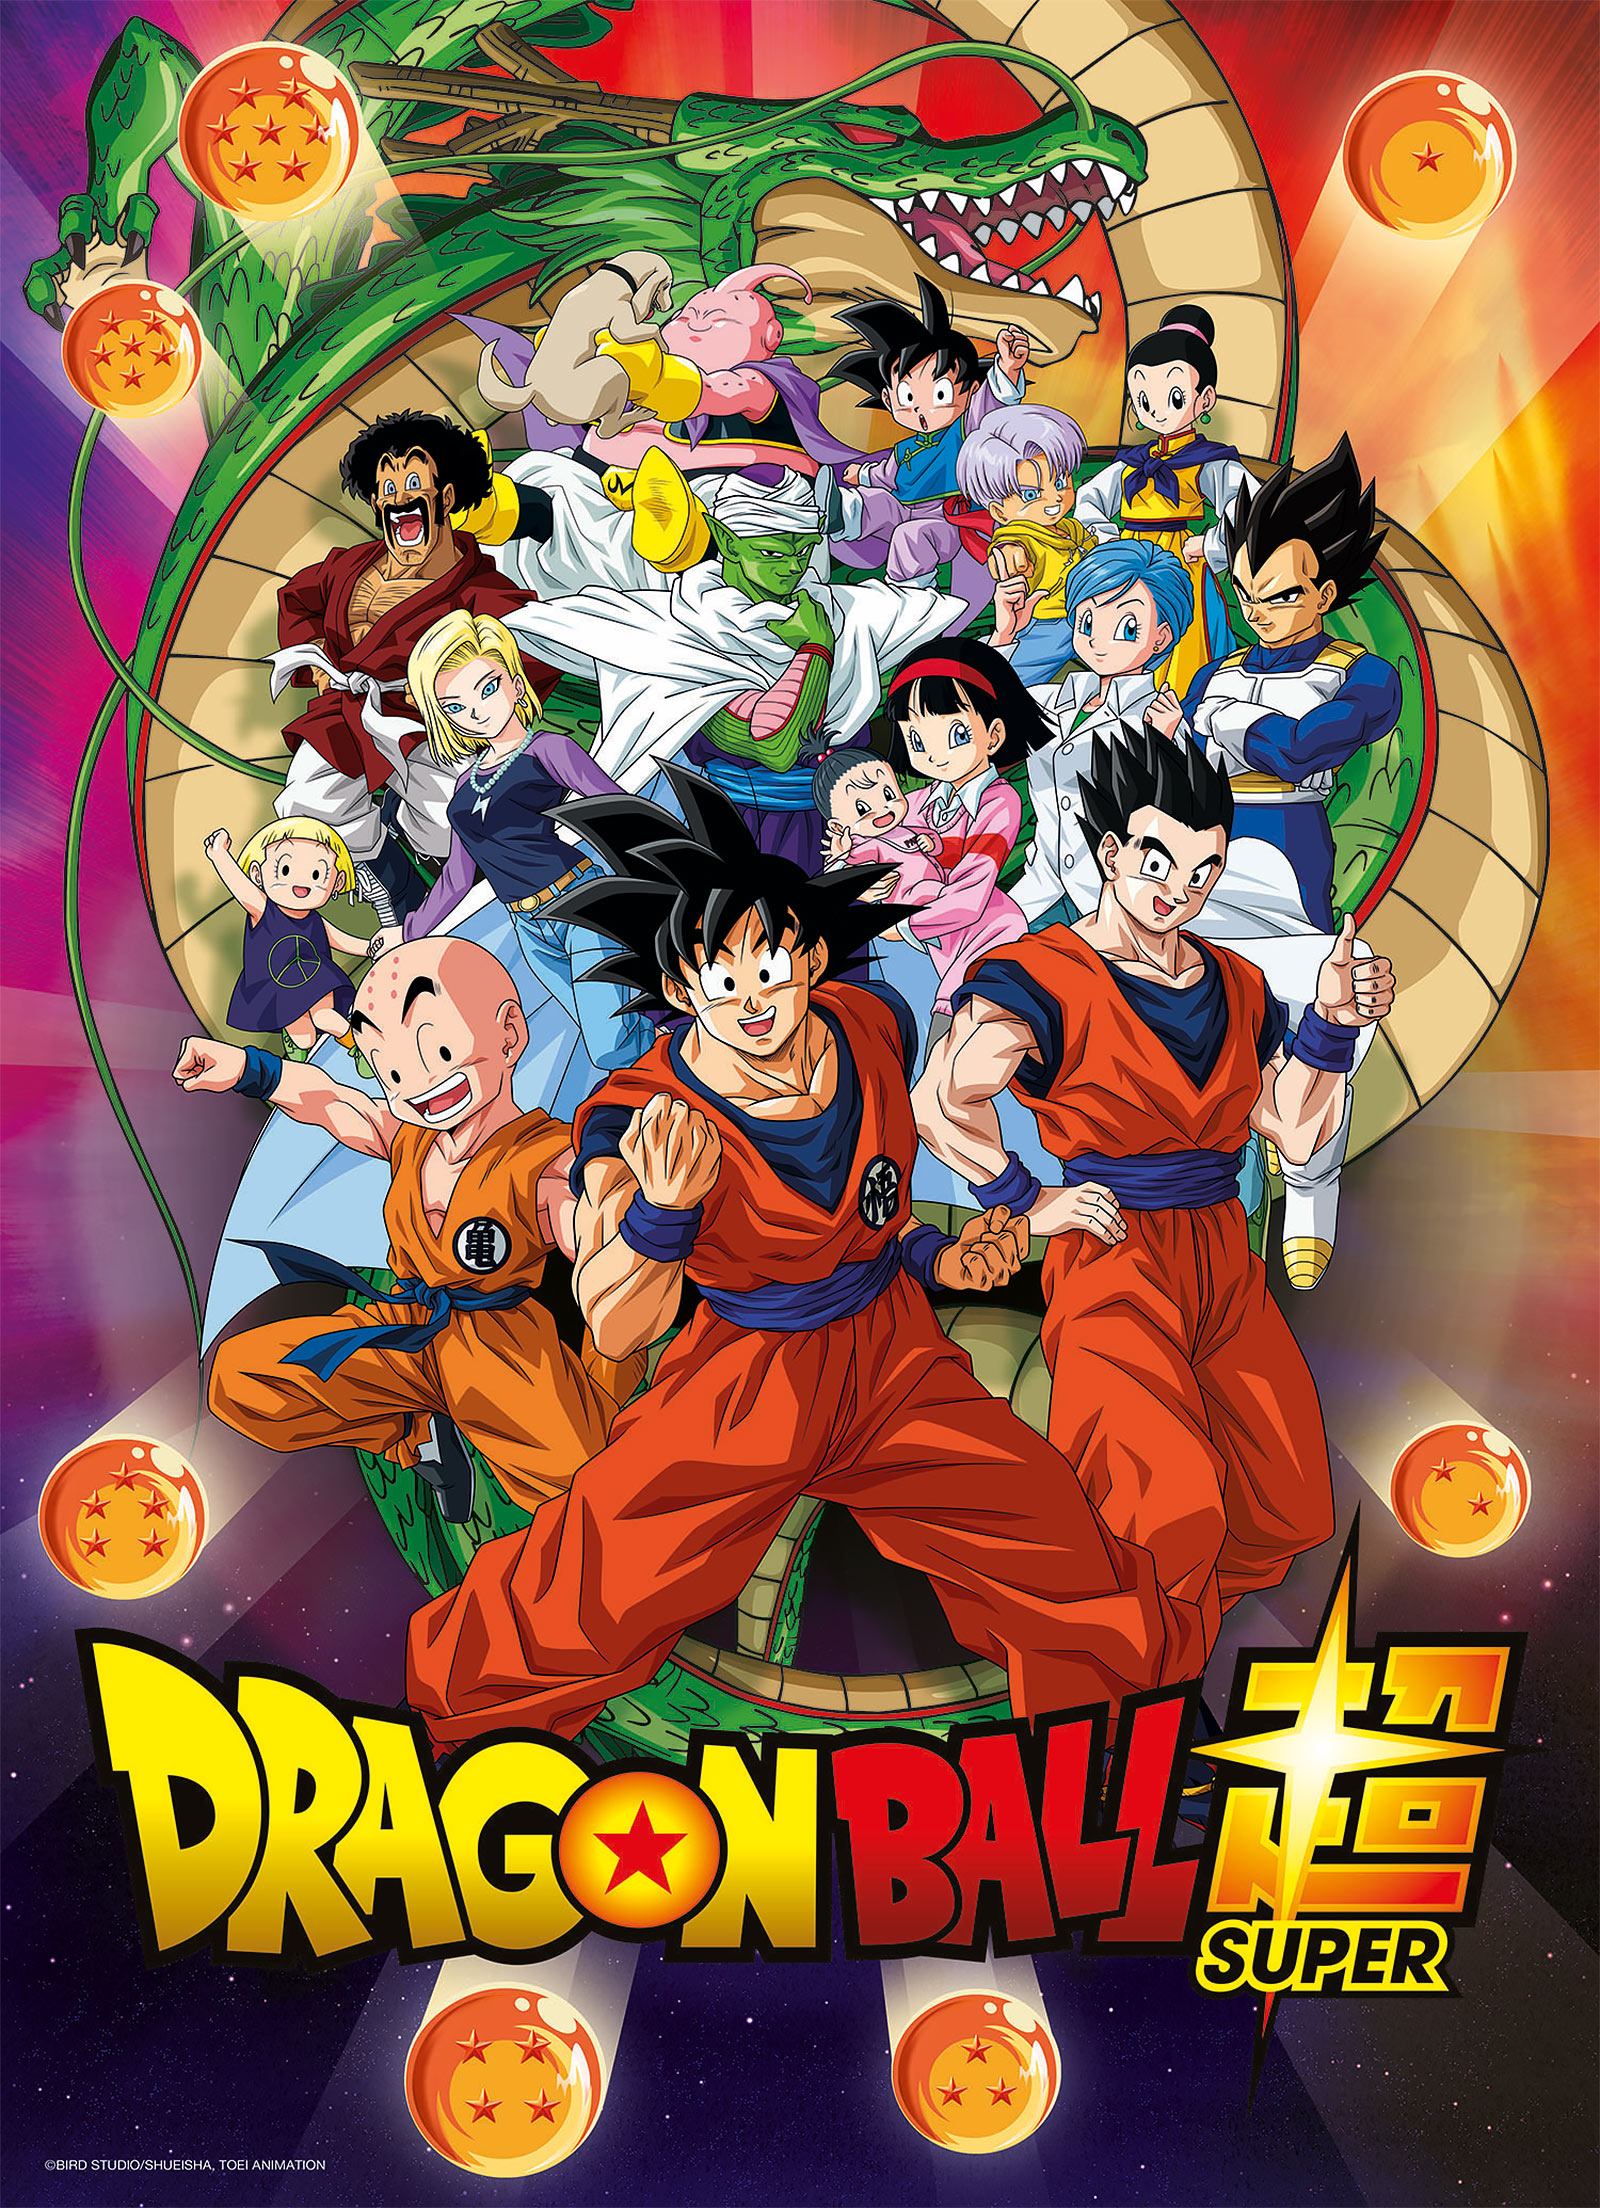 Dragon Ball Super - Characters Puzzle 1000 Teile